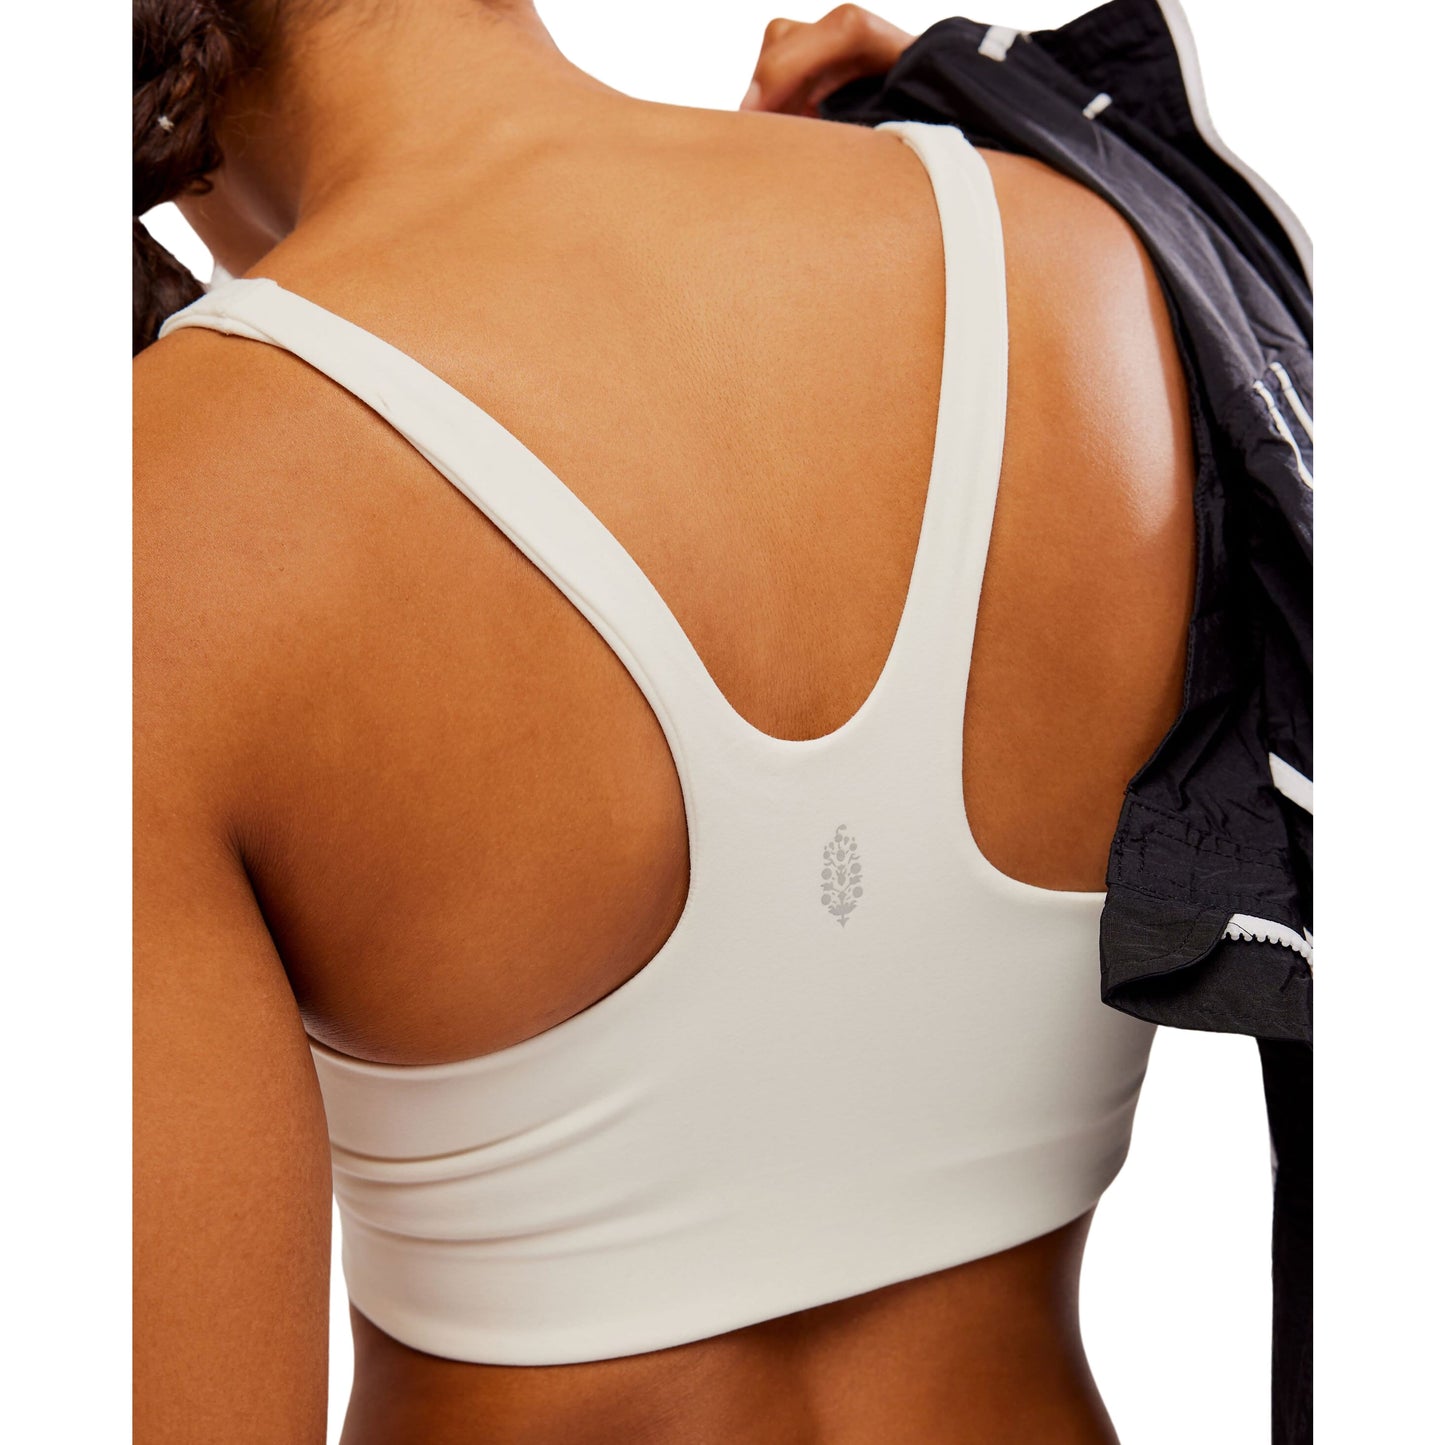 Close-up of a woman's back showing her wearing a white Free People Movement Never Better SQ Neck Bra with a racerback design and a small logo.